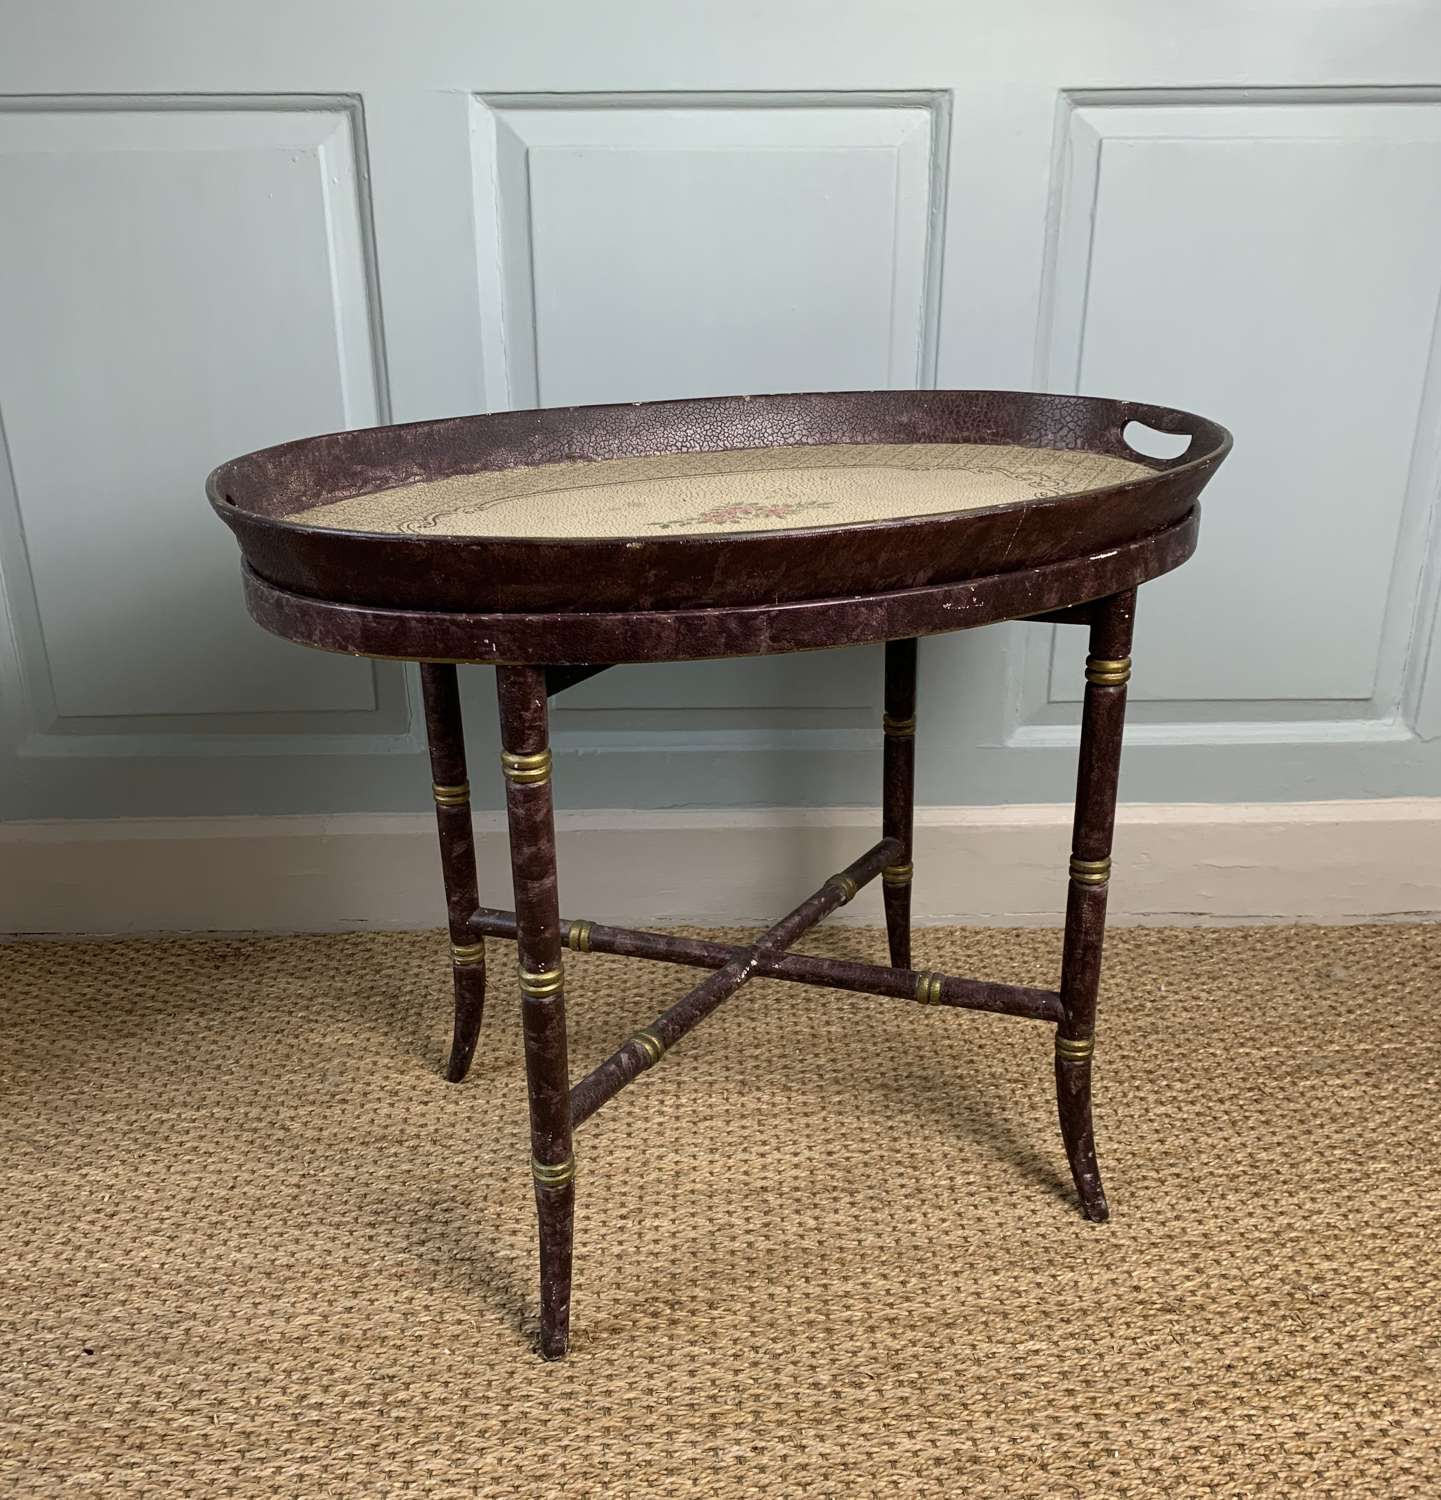 Vintage Painted Tray Table With Faux Bamboo Stand